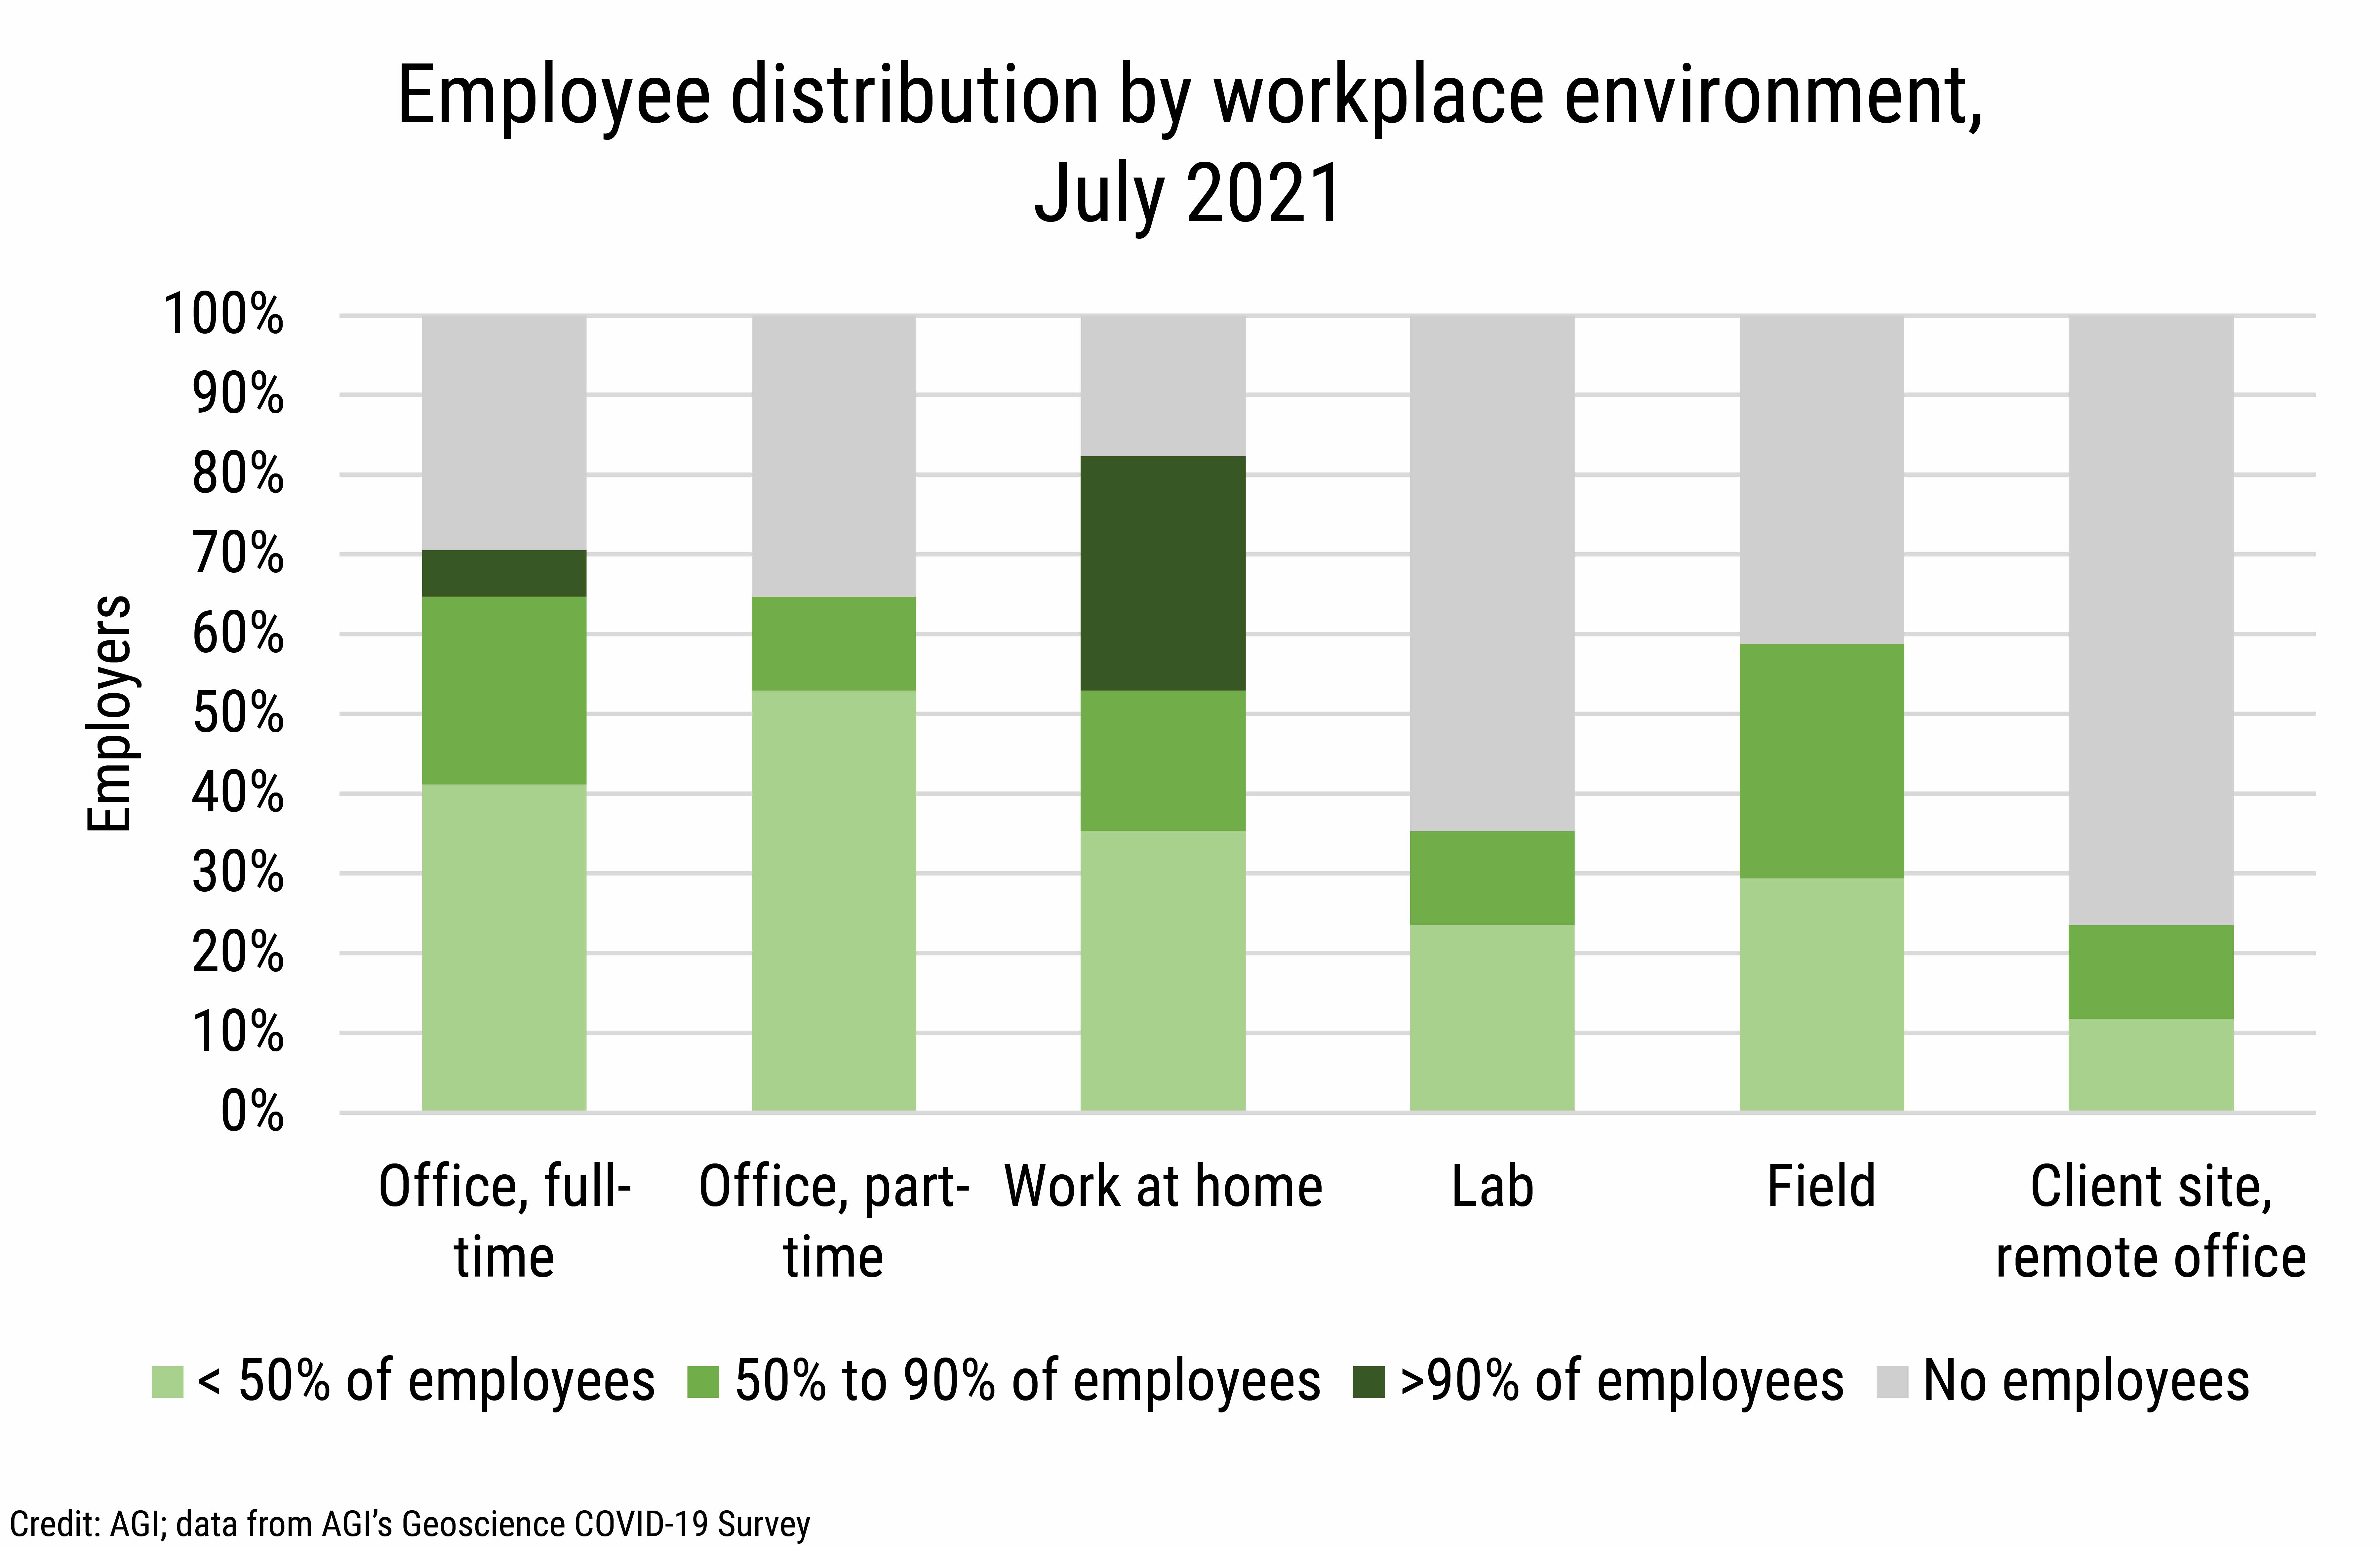 DB_2021-030 chart 07: Employee distribution by workplace environment, July 2021 (Credit: AGI; data from AGI's Geoscience COVID-19 Survey)